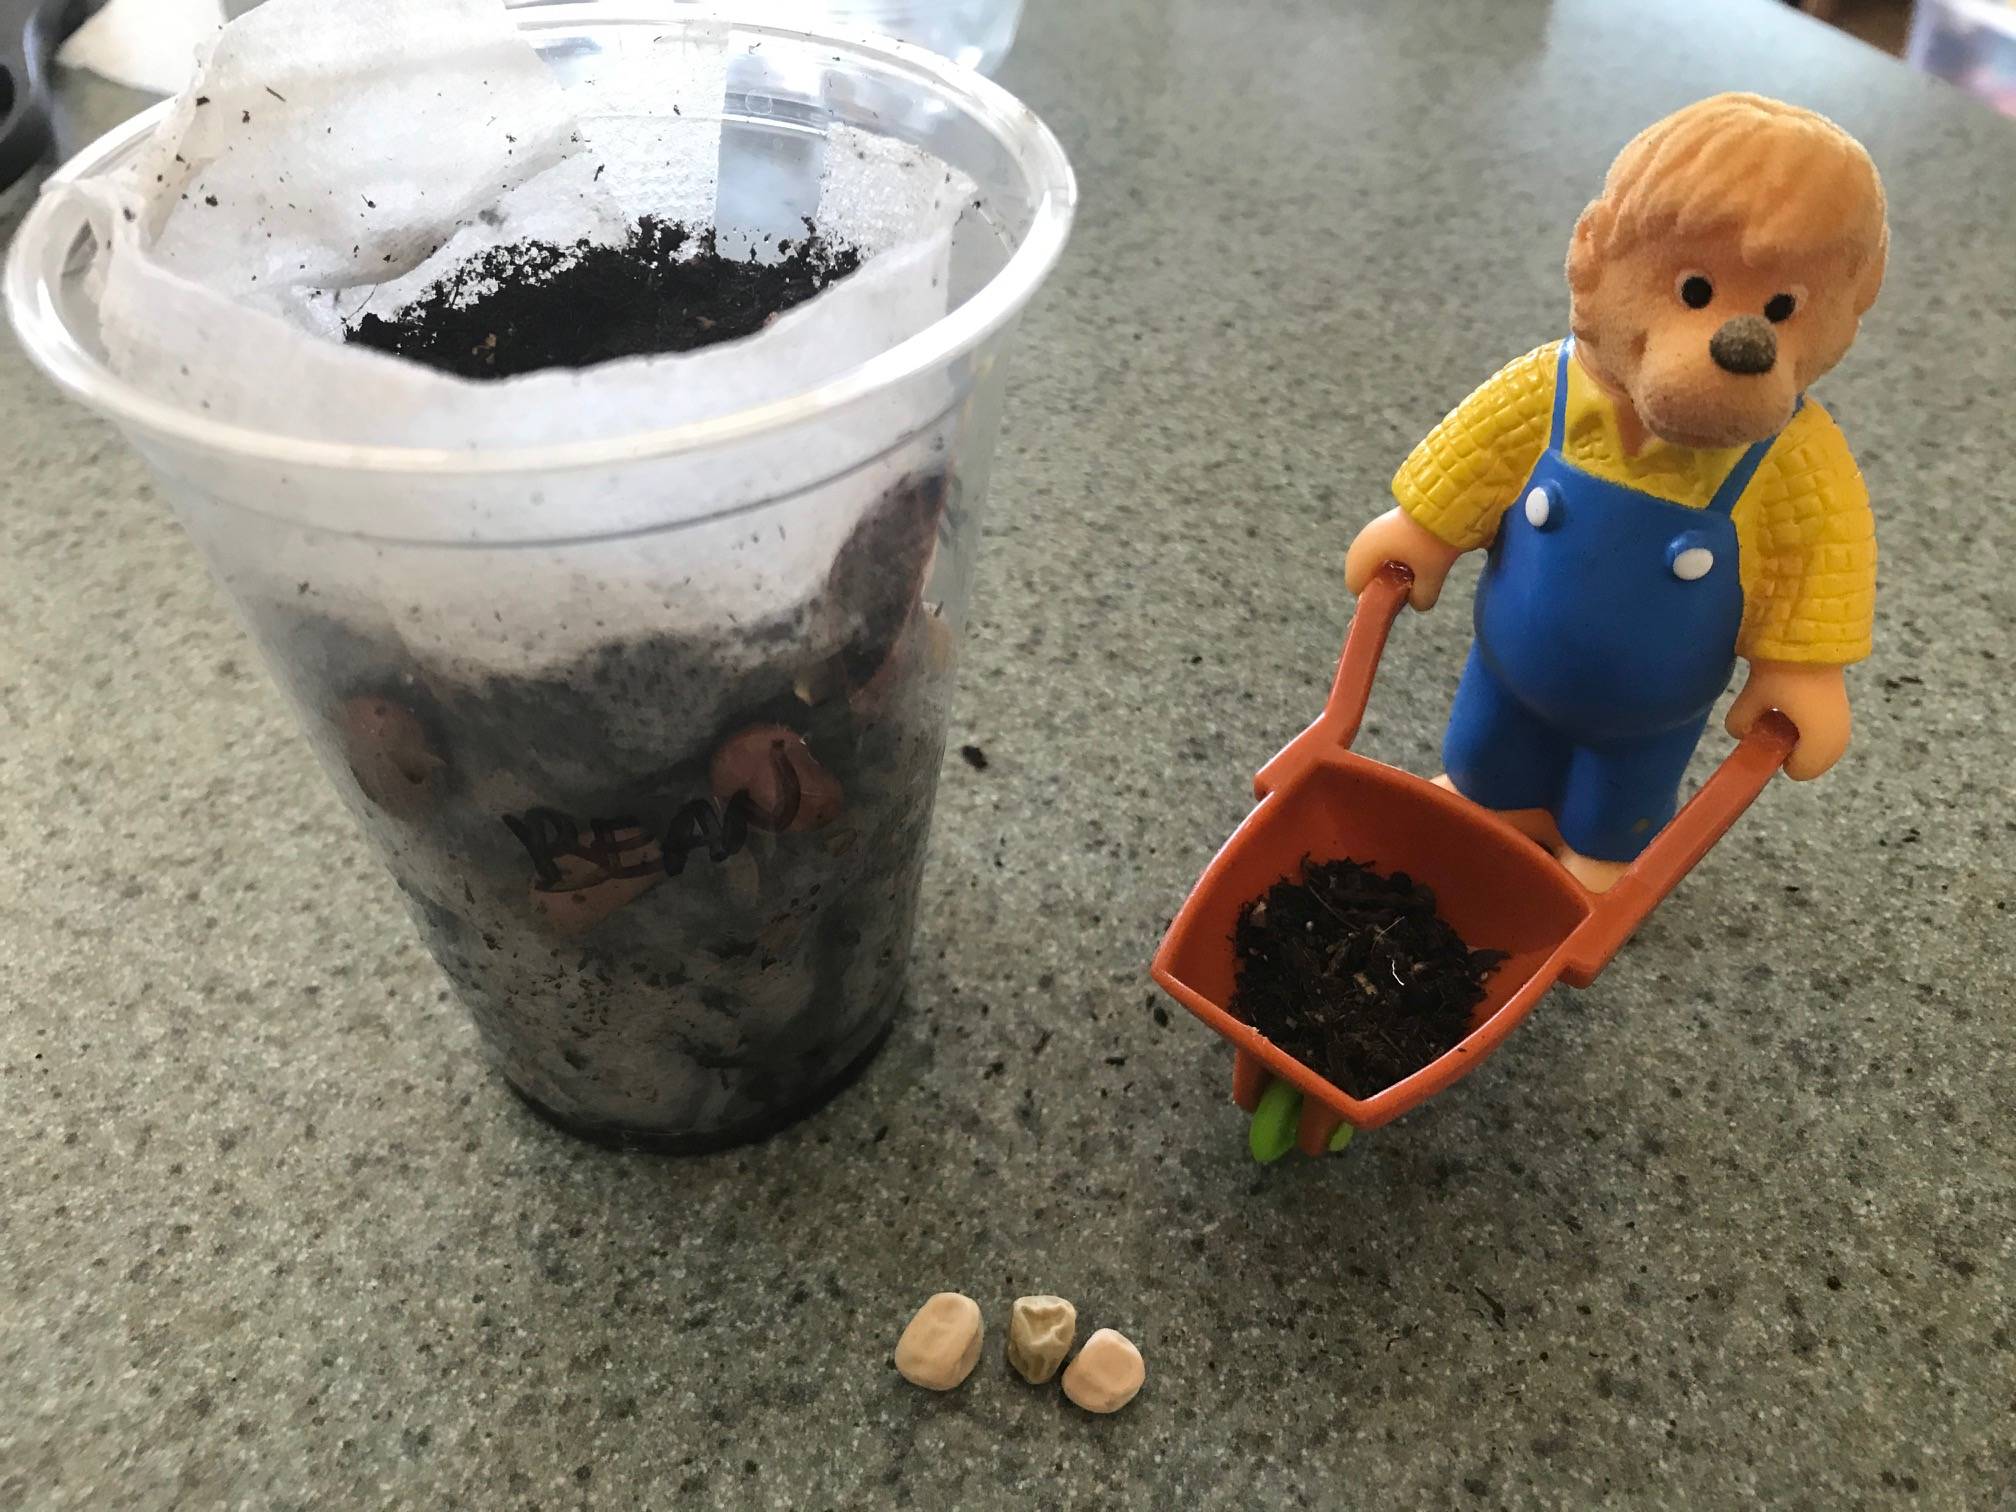 Clallam County Master Gardeners encourage parents and children to take a hands-on approach to learnign about growing plants from seeds. Photo by Susan Kalmar